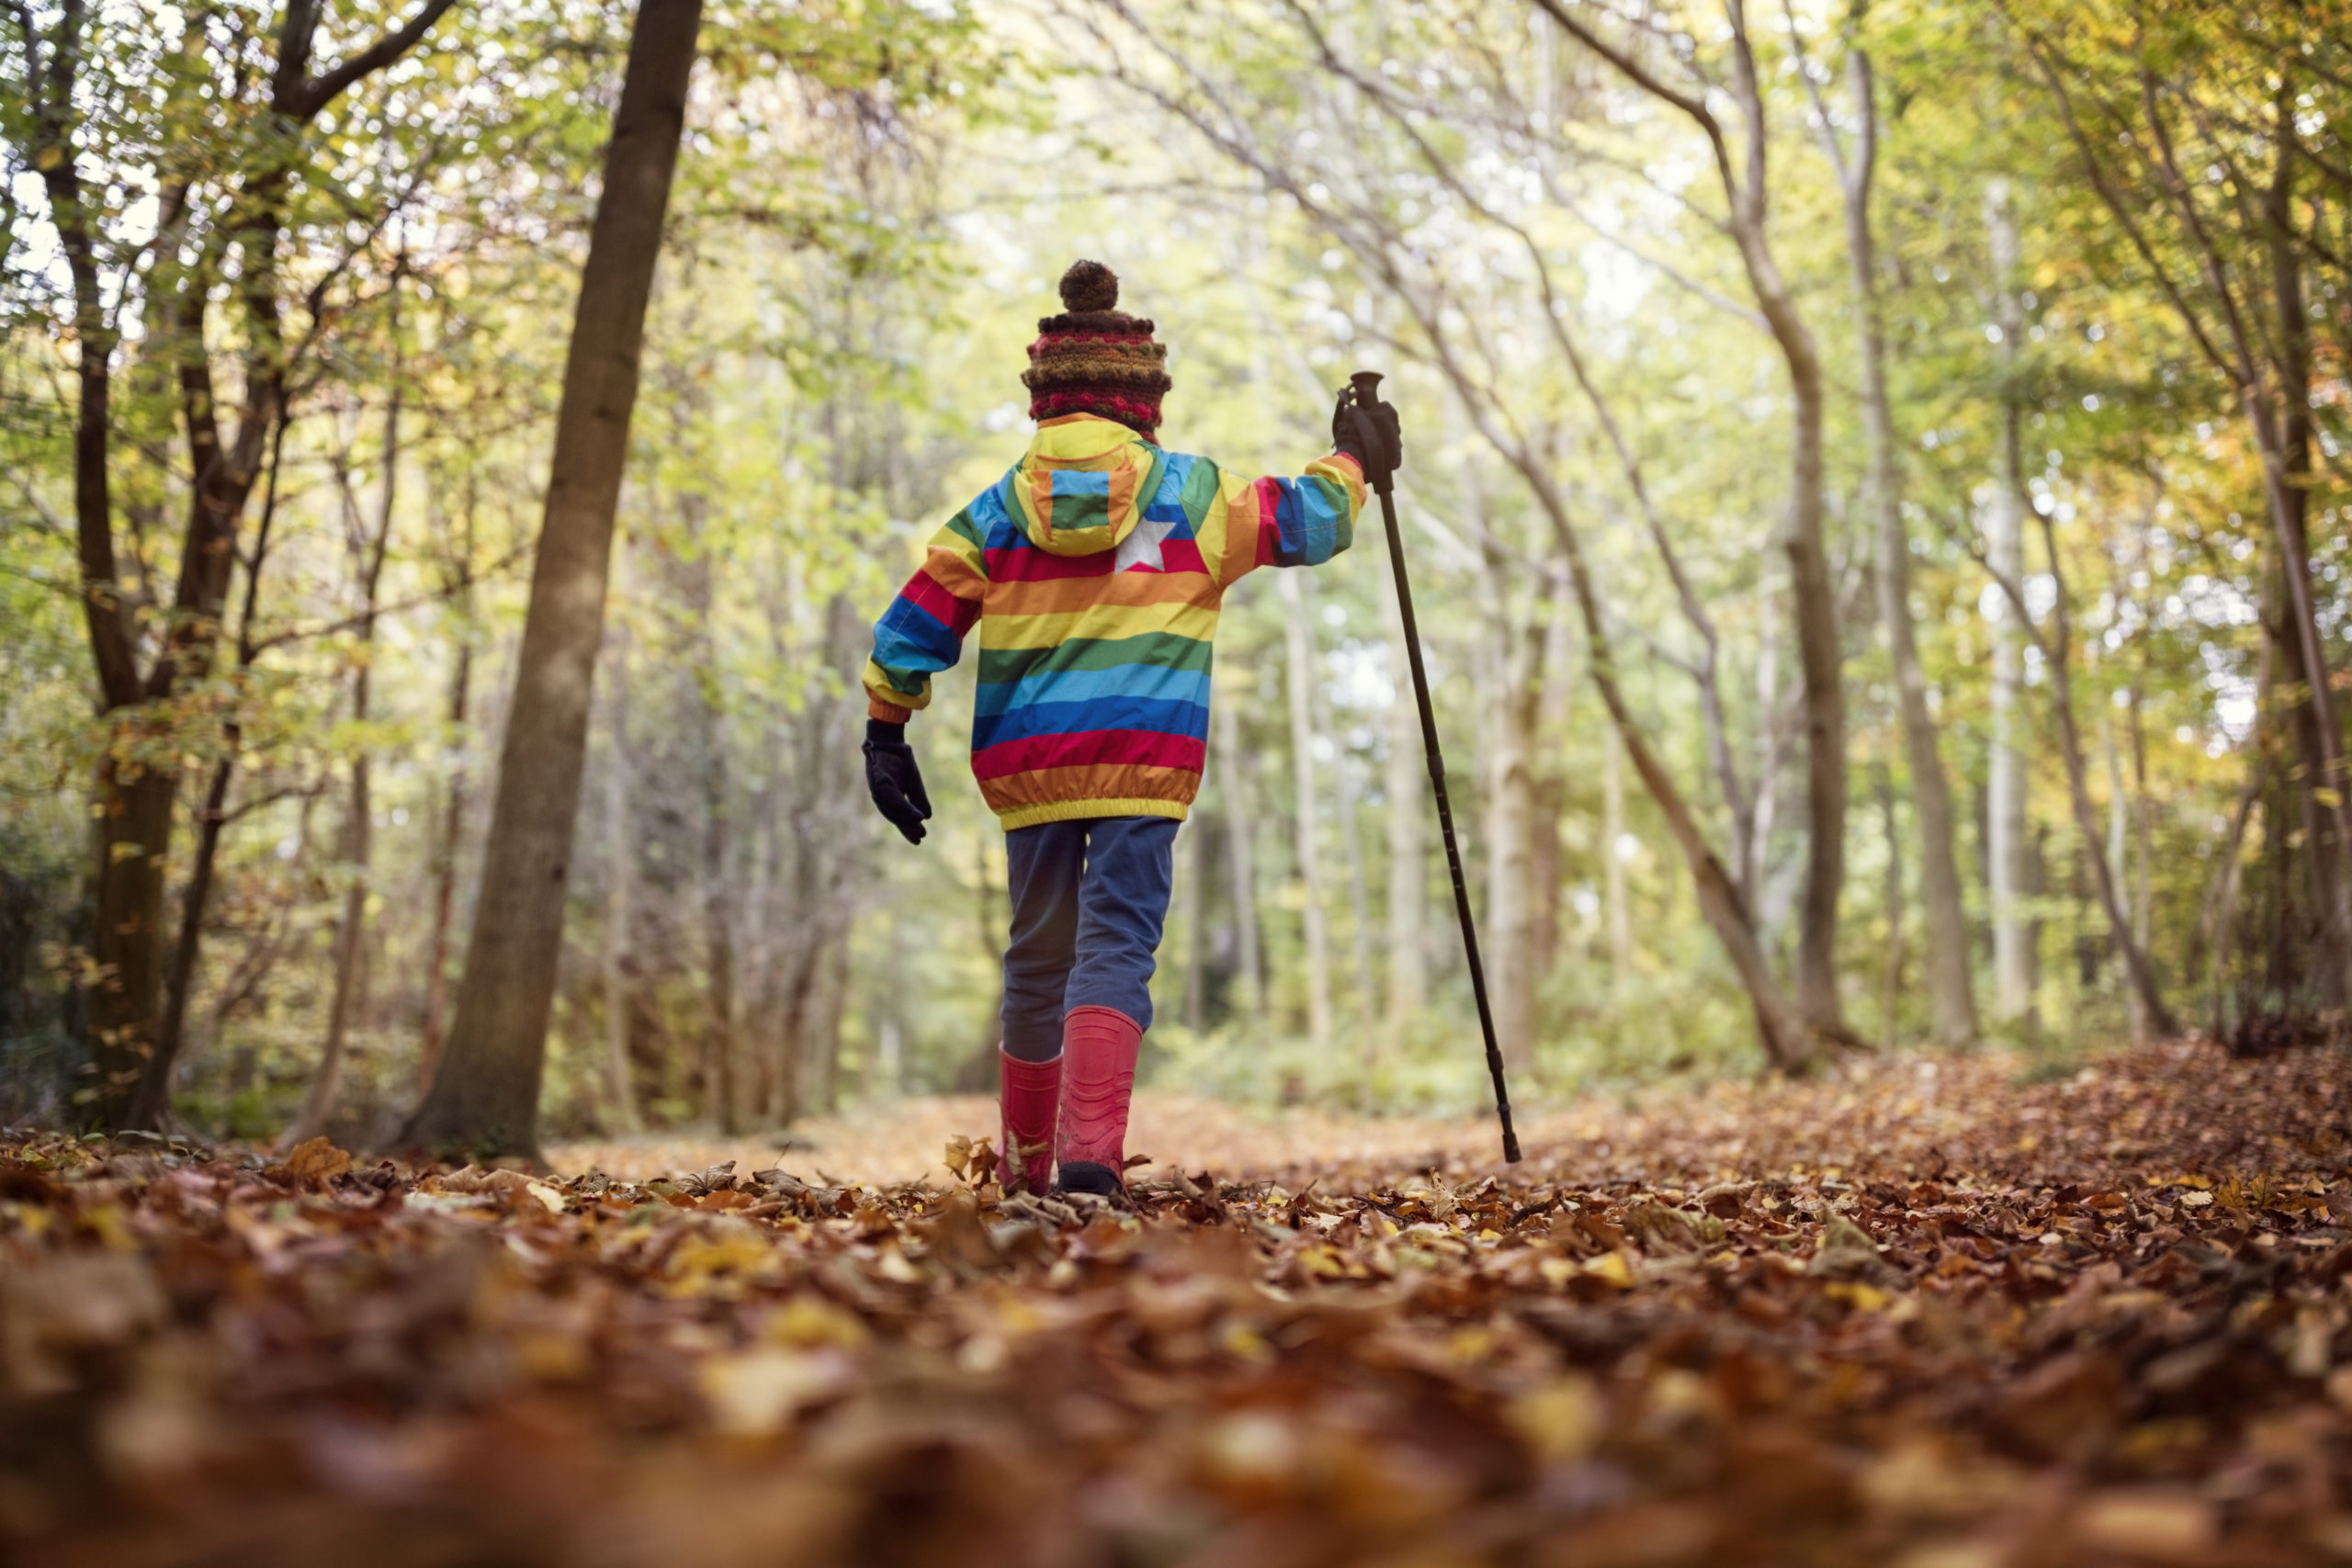 Child with back turned walks in forest, signifying resilience